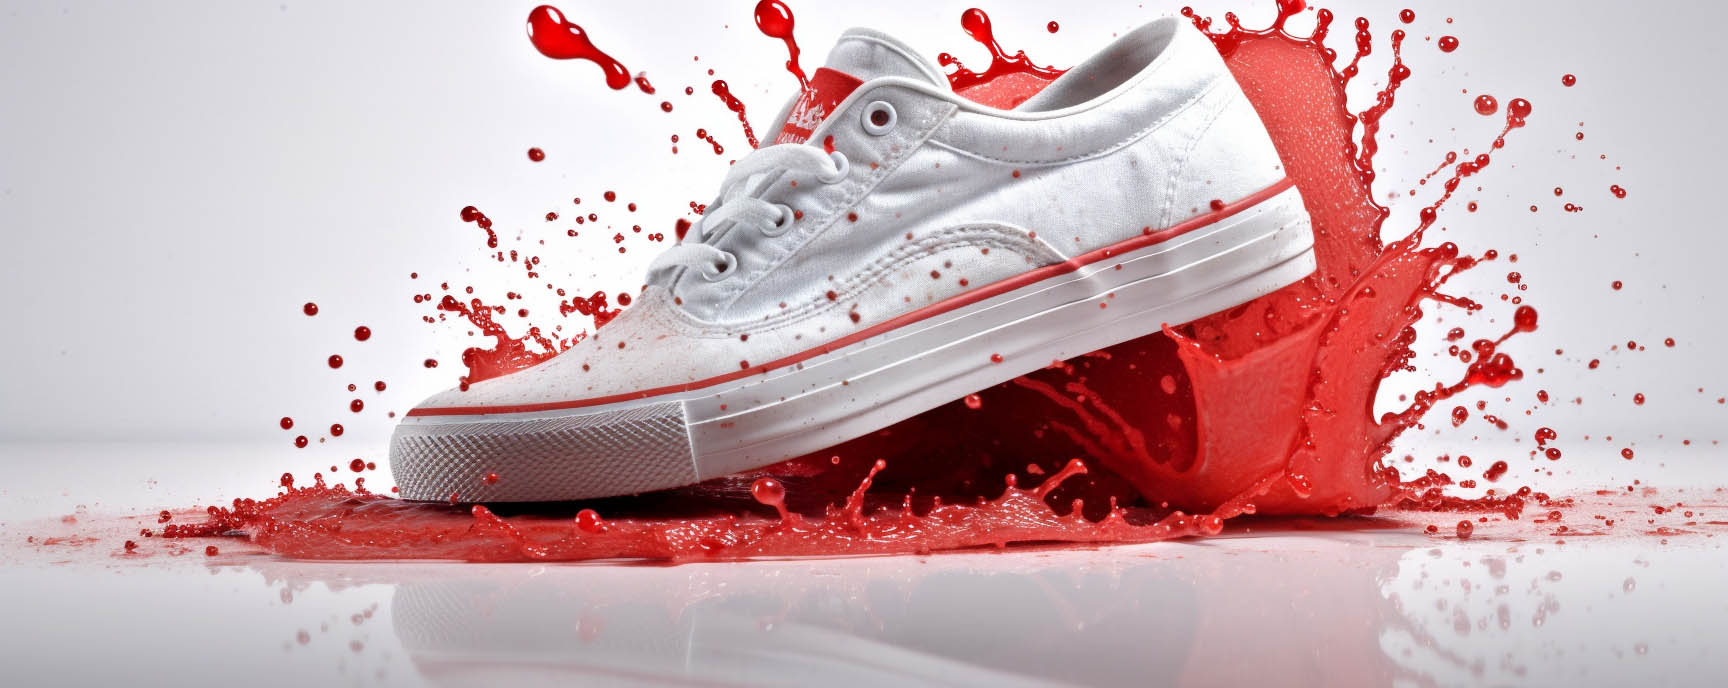 White and red canvas skate shoes made by 2HEX, the skate shoes manufacturer.